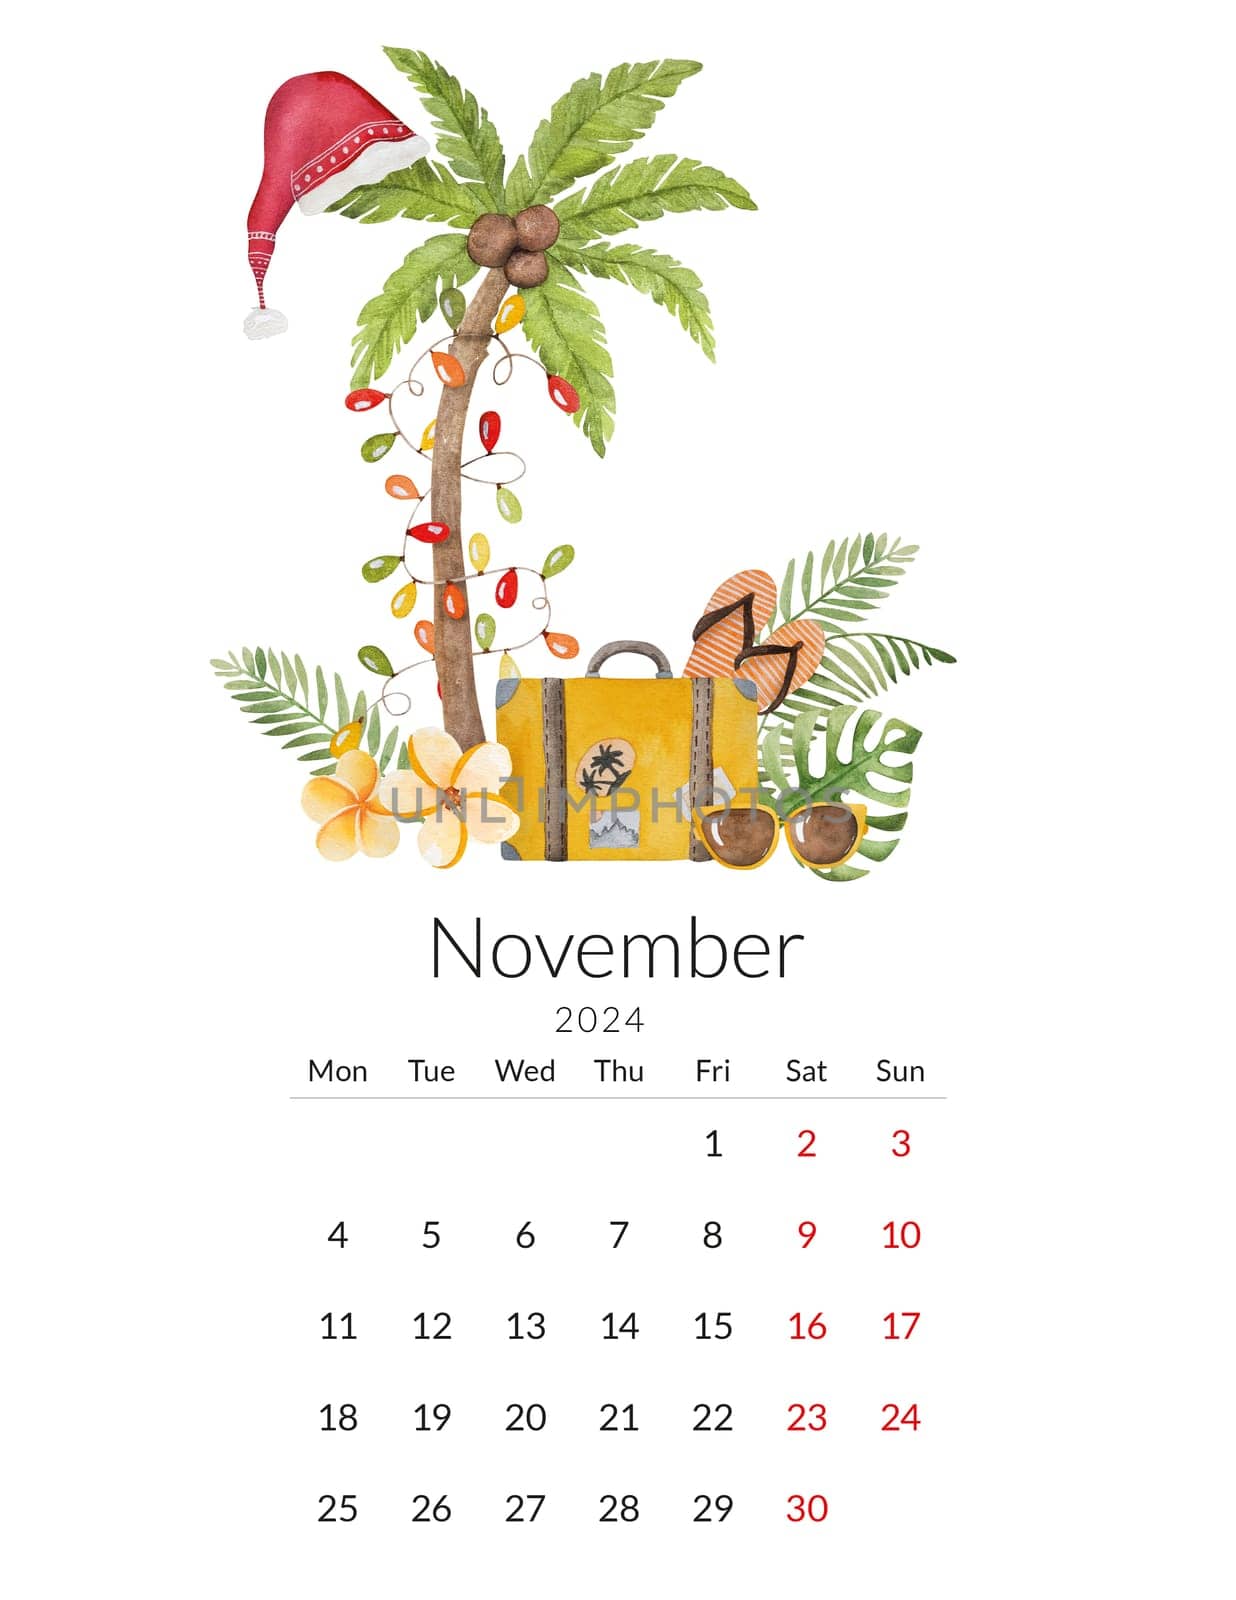 November 2024 calendar template. Handmade watercolor - tropical illustration with palm trees New Year's hat and a suitcase